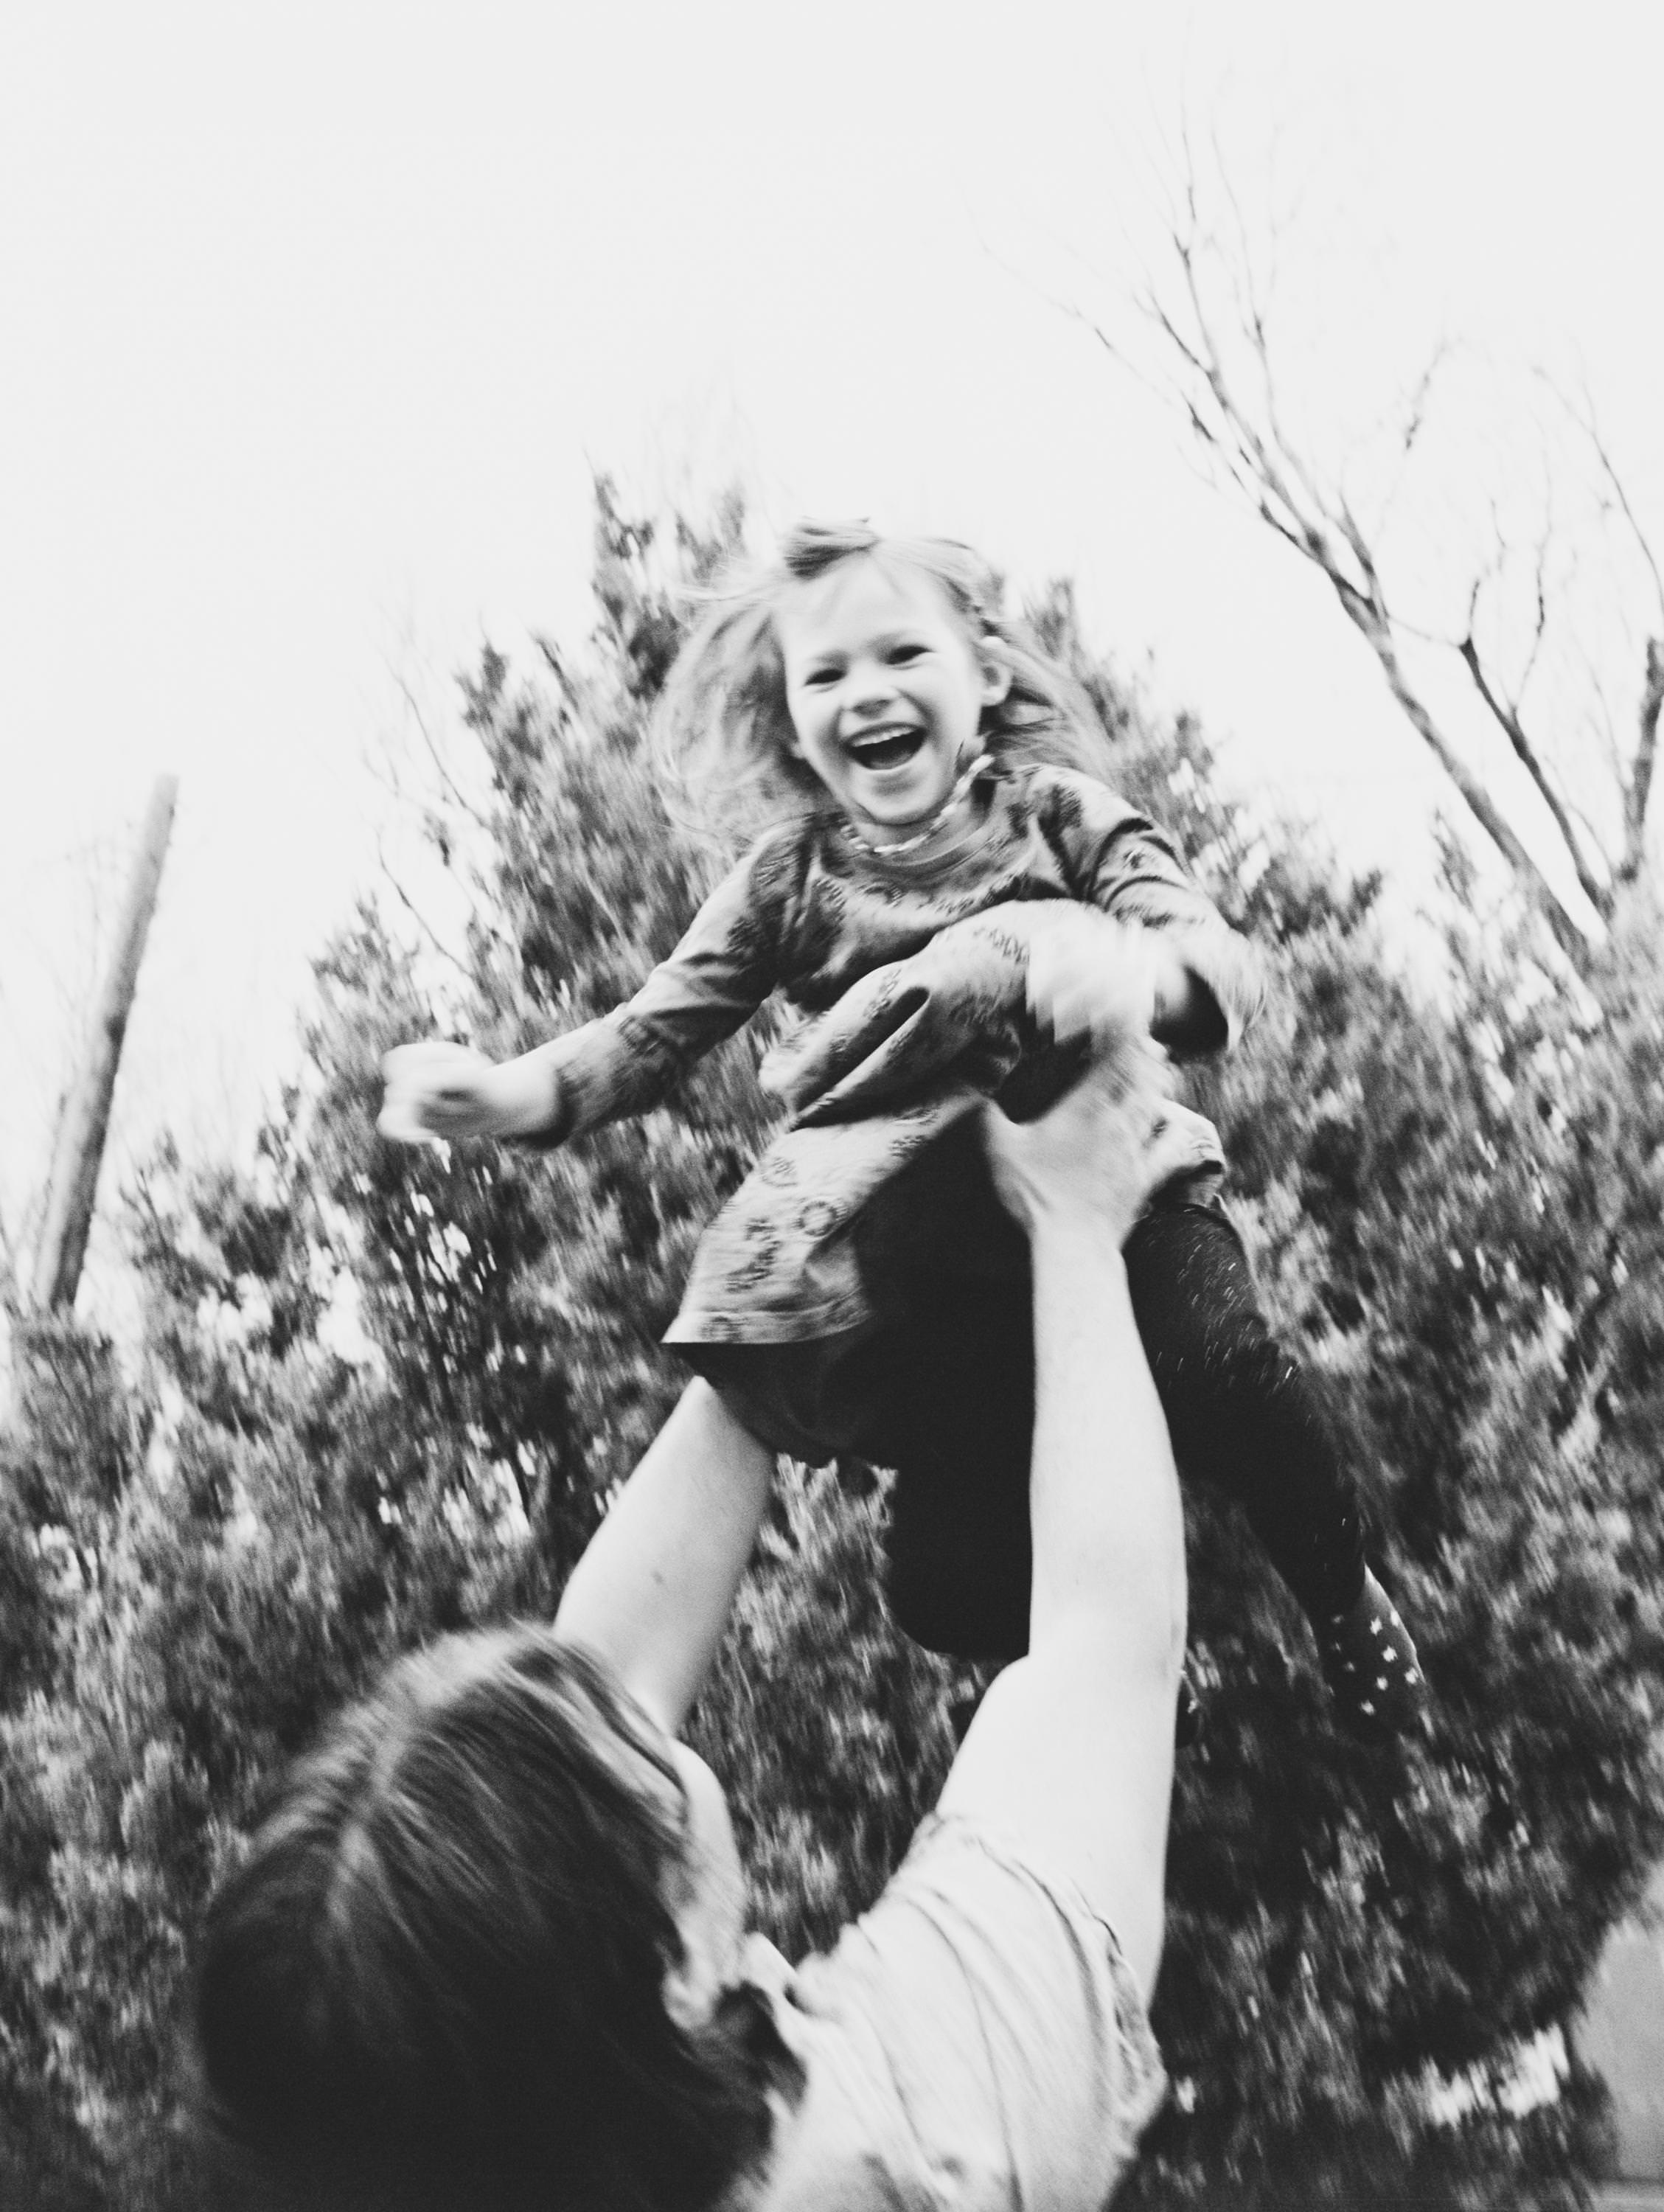 A black and white image of a dad throwing his girl into the air